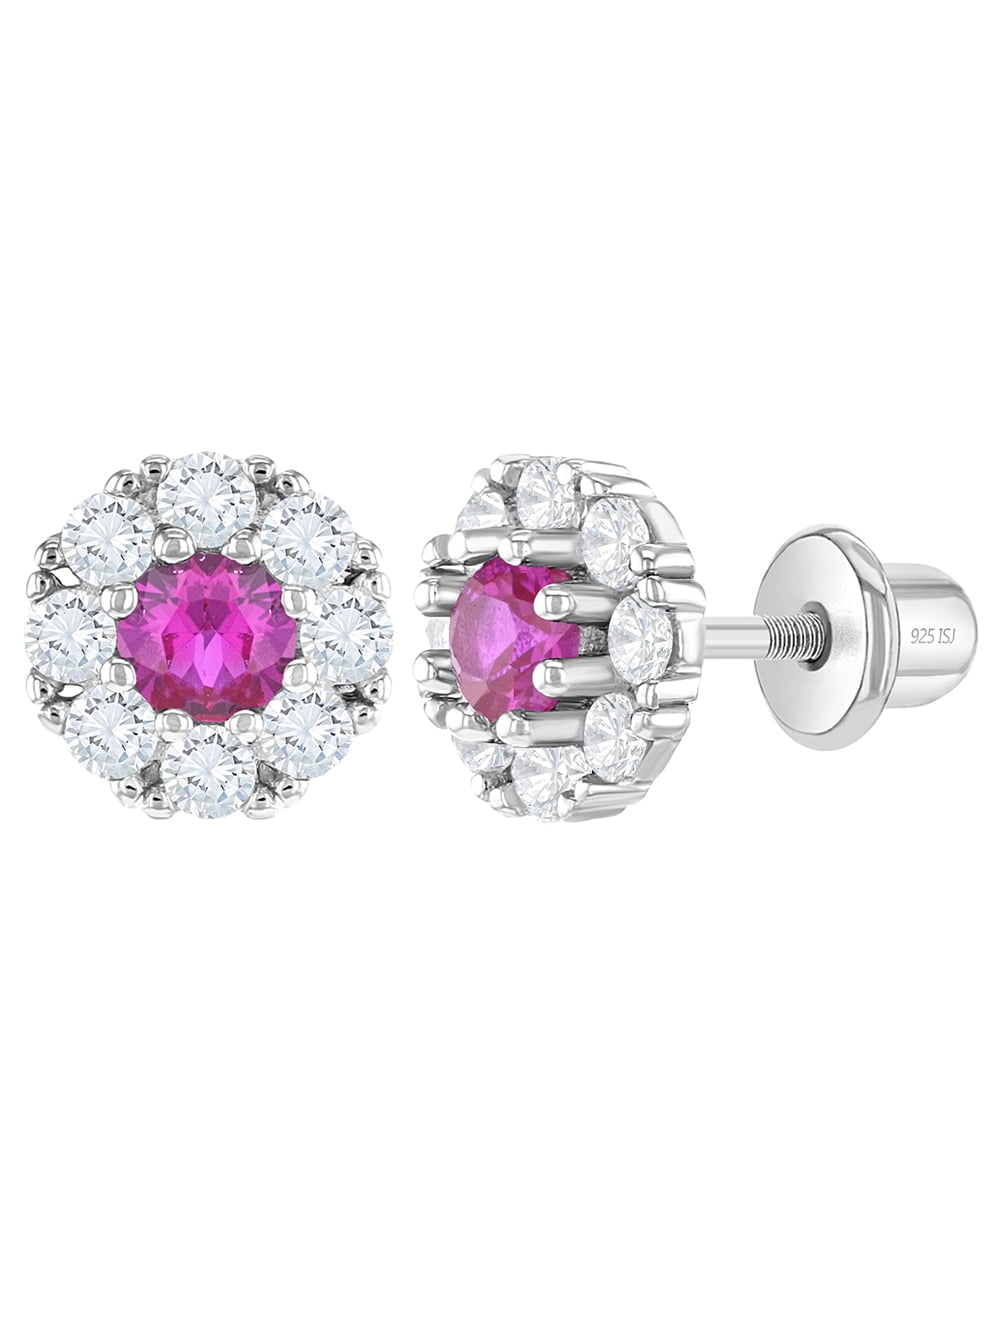 925 Sterling Silver Purple Clear CZ Flower Infant Earrings with Safety Backs 